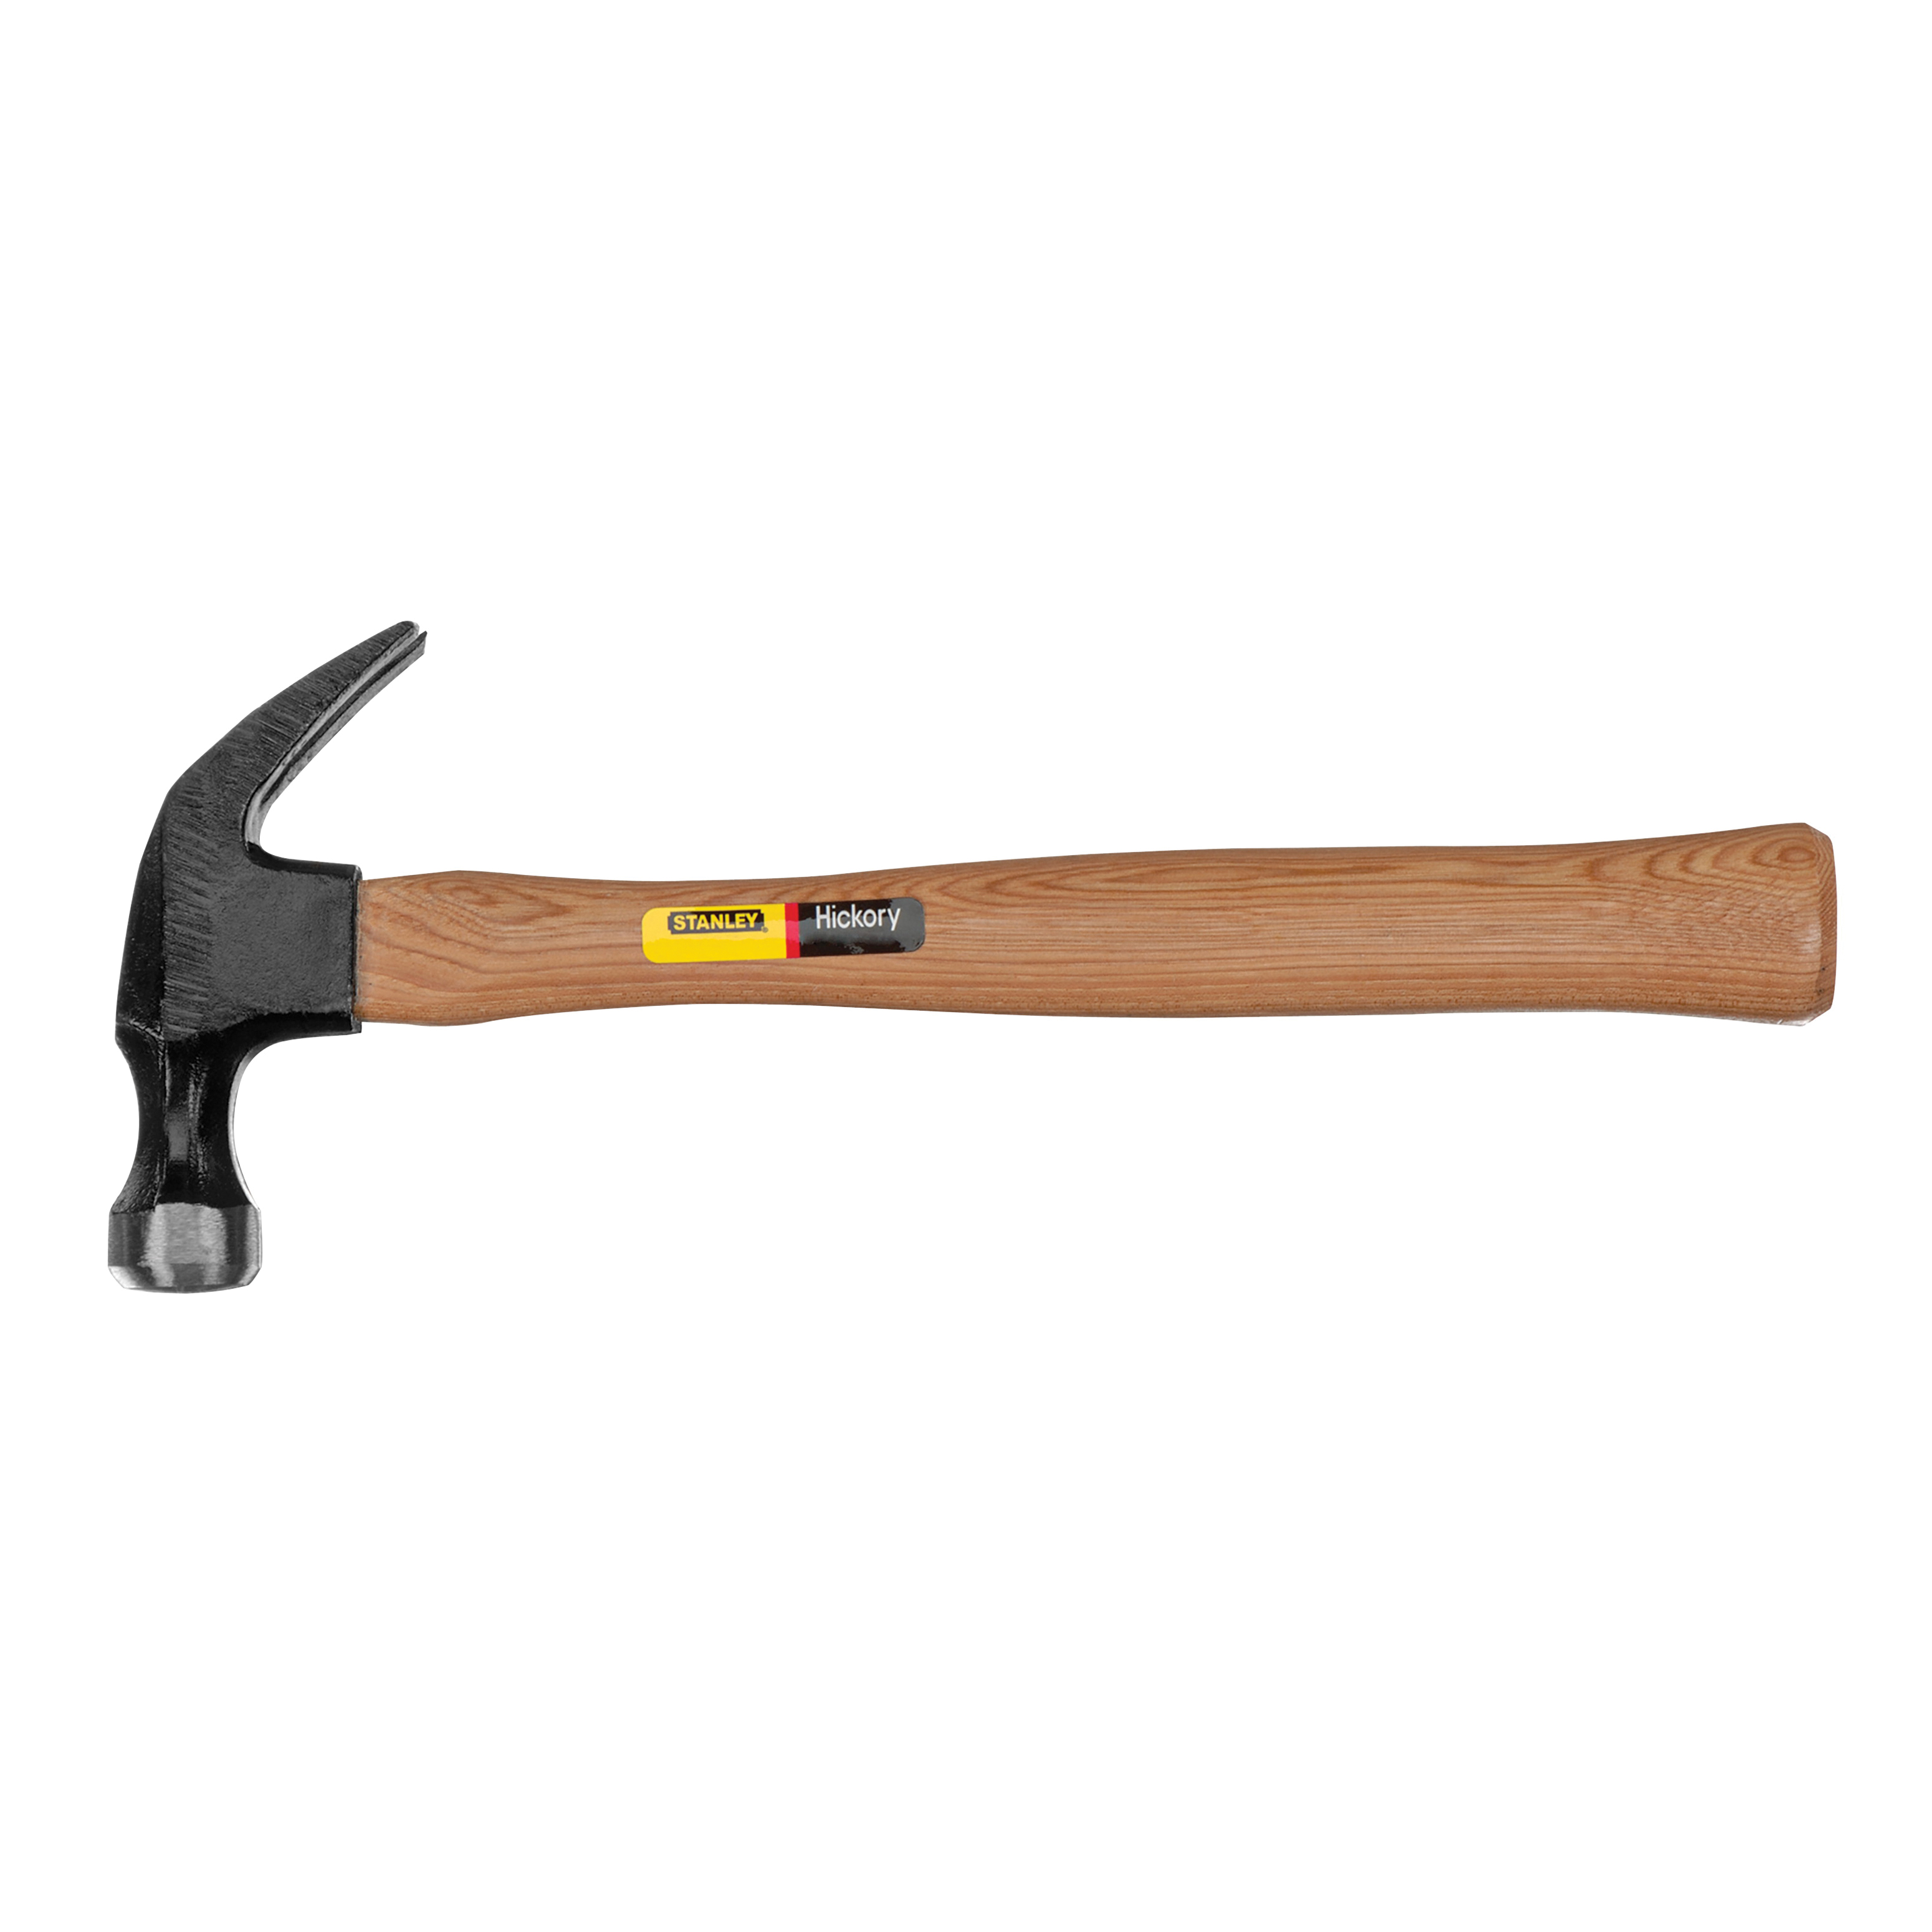 Stanley 51-613 Nailing Hammer, 7 oz Head, Curved Claw Head, HCS Head, 11-1/4 in OAL